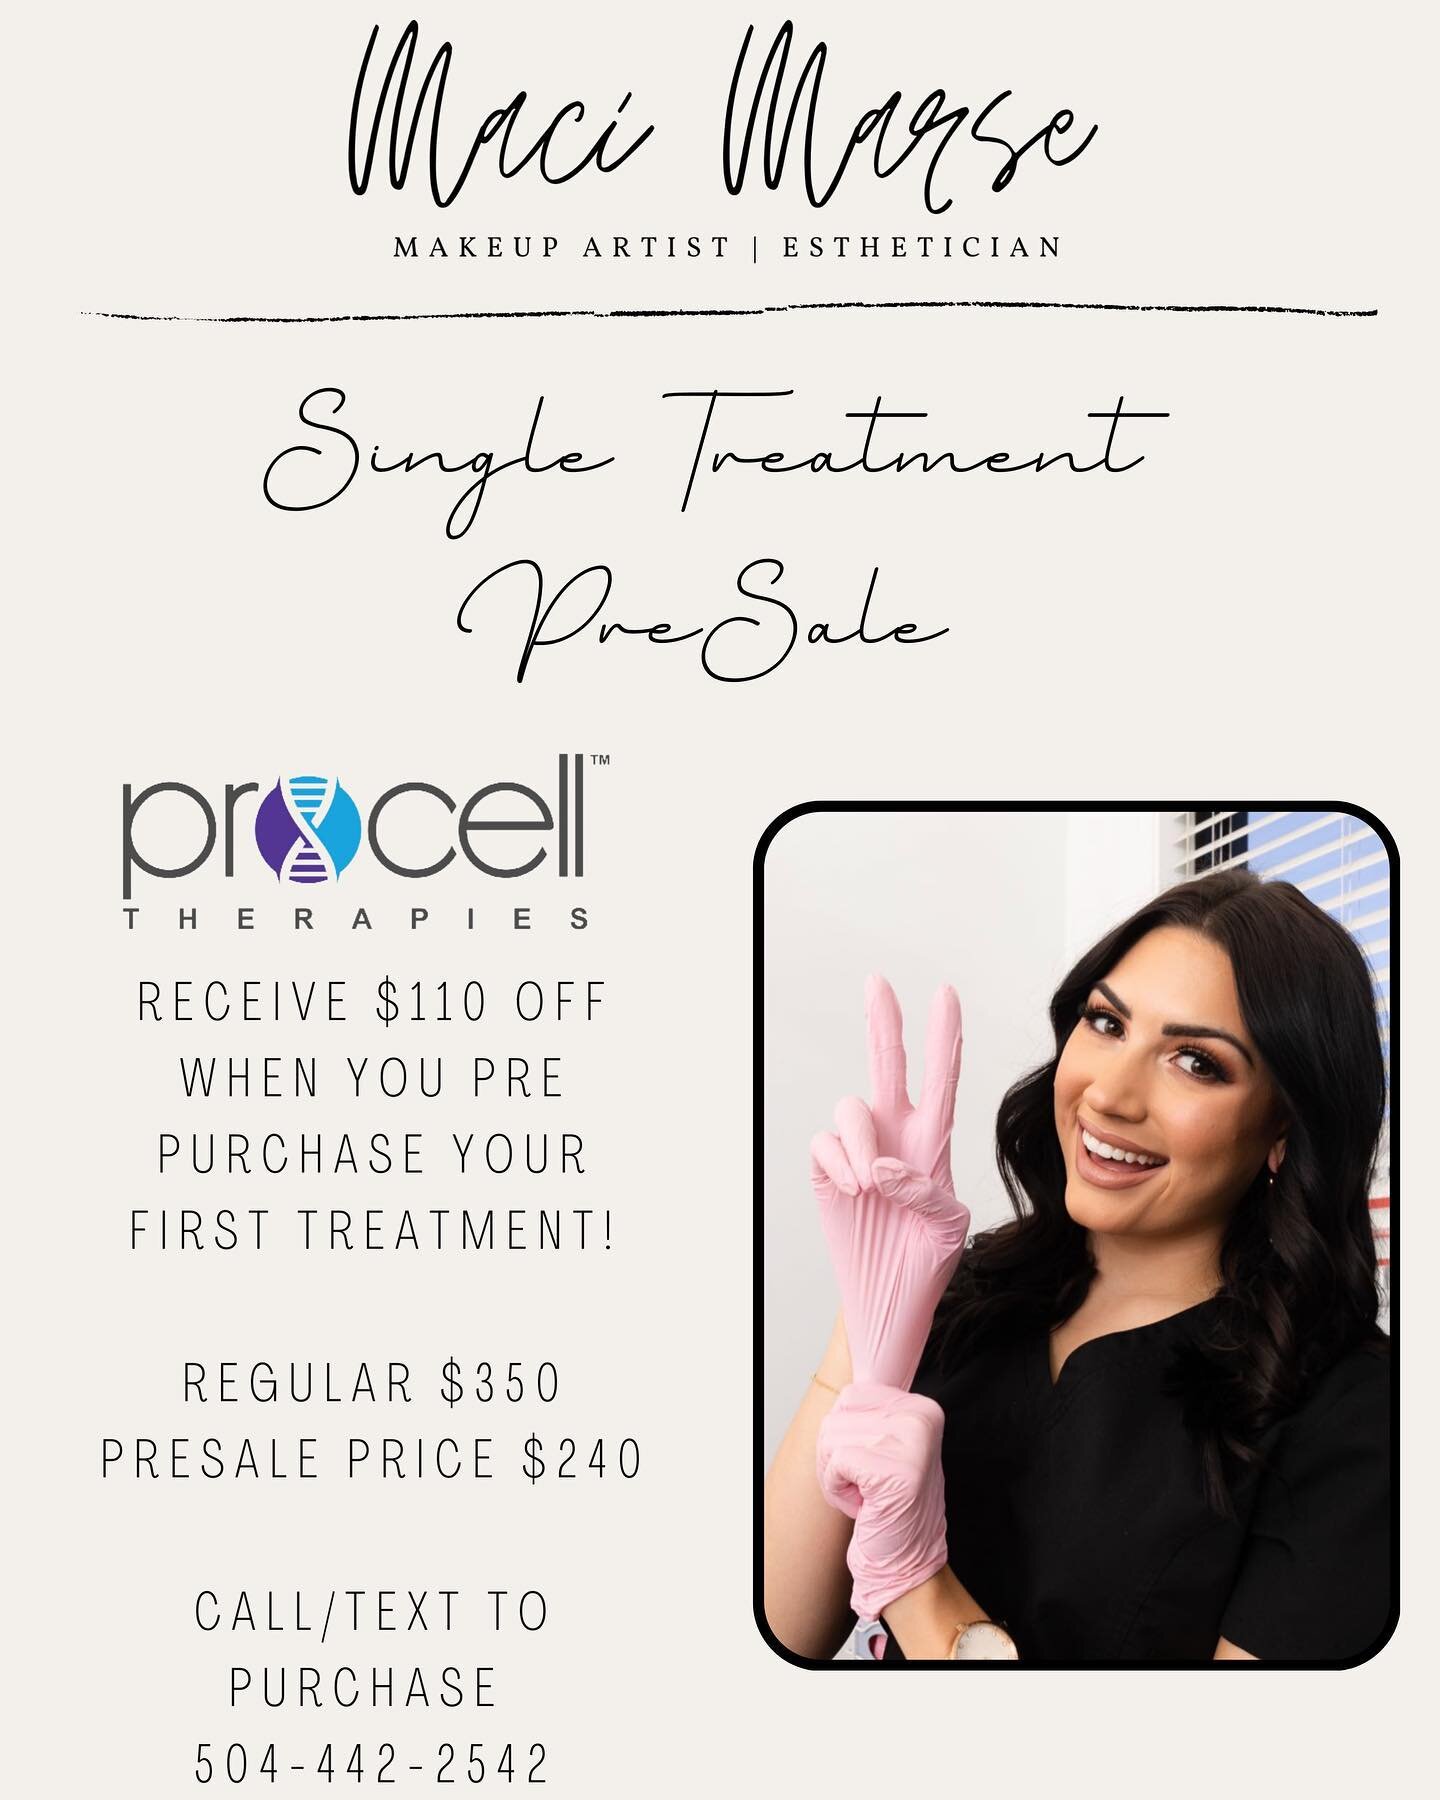 @procelltherapies $110 OFF PRE SALE

Regular $350
Pre Sale $240

includes a Double Cleanse, Dermaplaning, numbing &amp; Microchanneling, and a Hydrating Calming Mask

Swipe to read more about Microchanneling and see some Before &amp; Afters

Call/tex